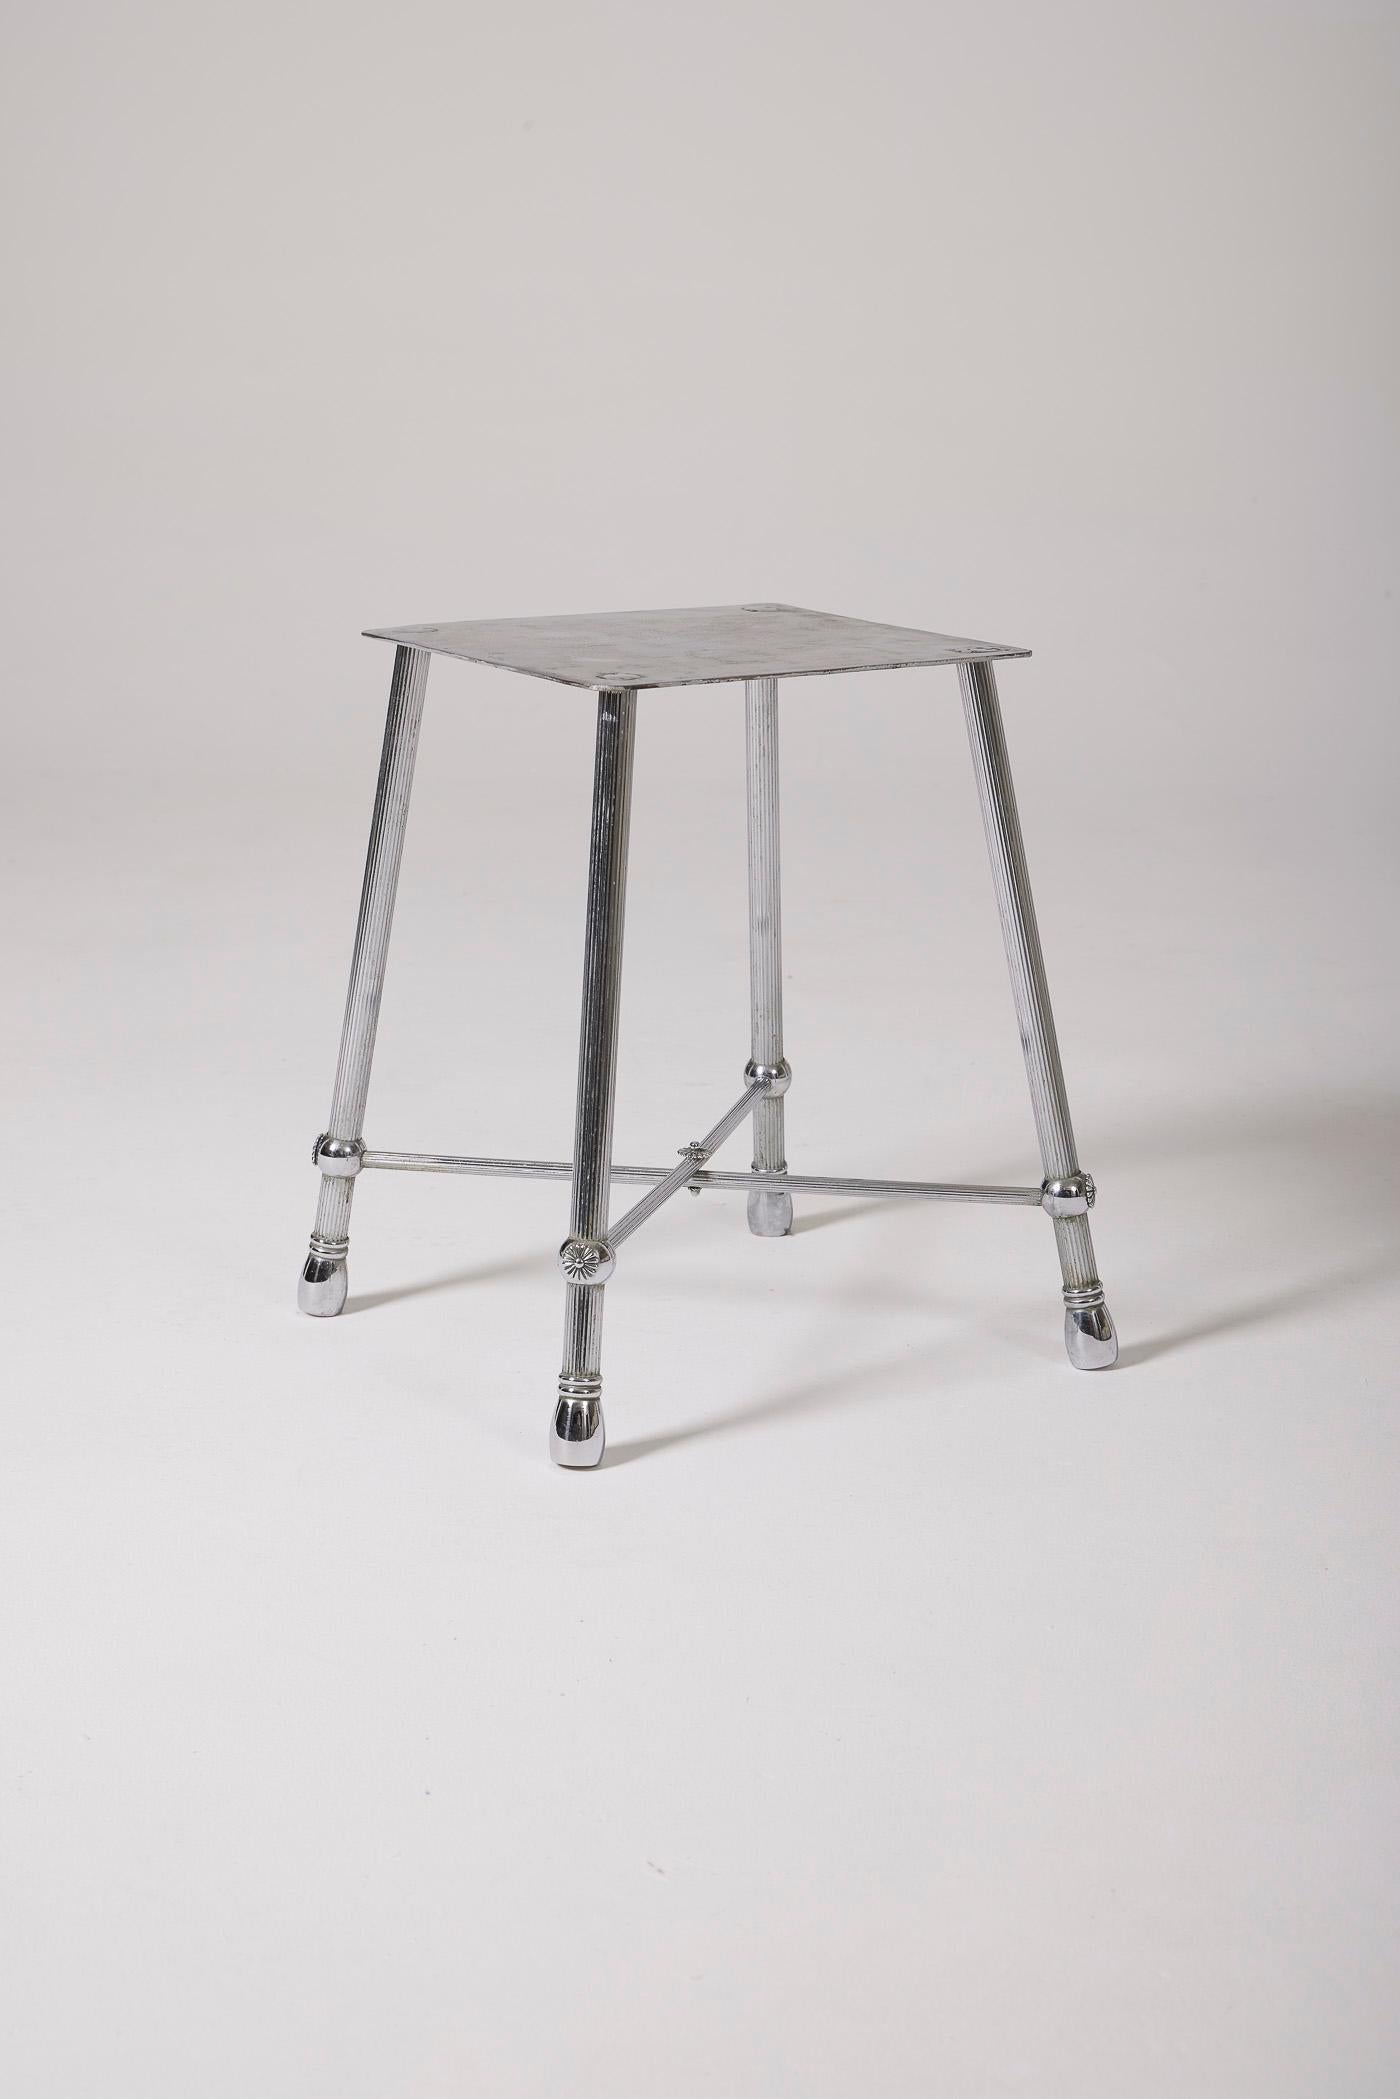 Square stool in silver-colored metal, in good general condition. Slight signs of wear are noted, which adds an authentic character to this piece of furniture.
LP2643